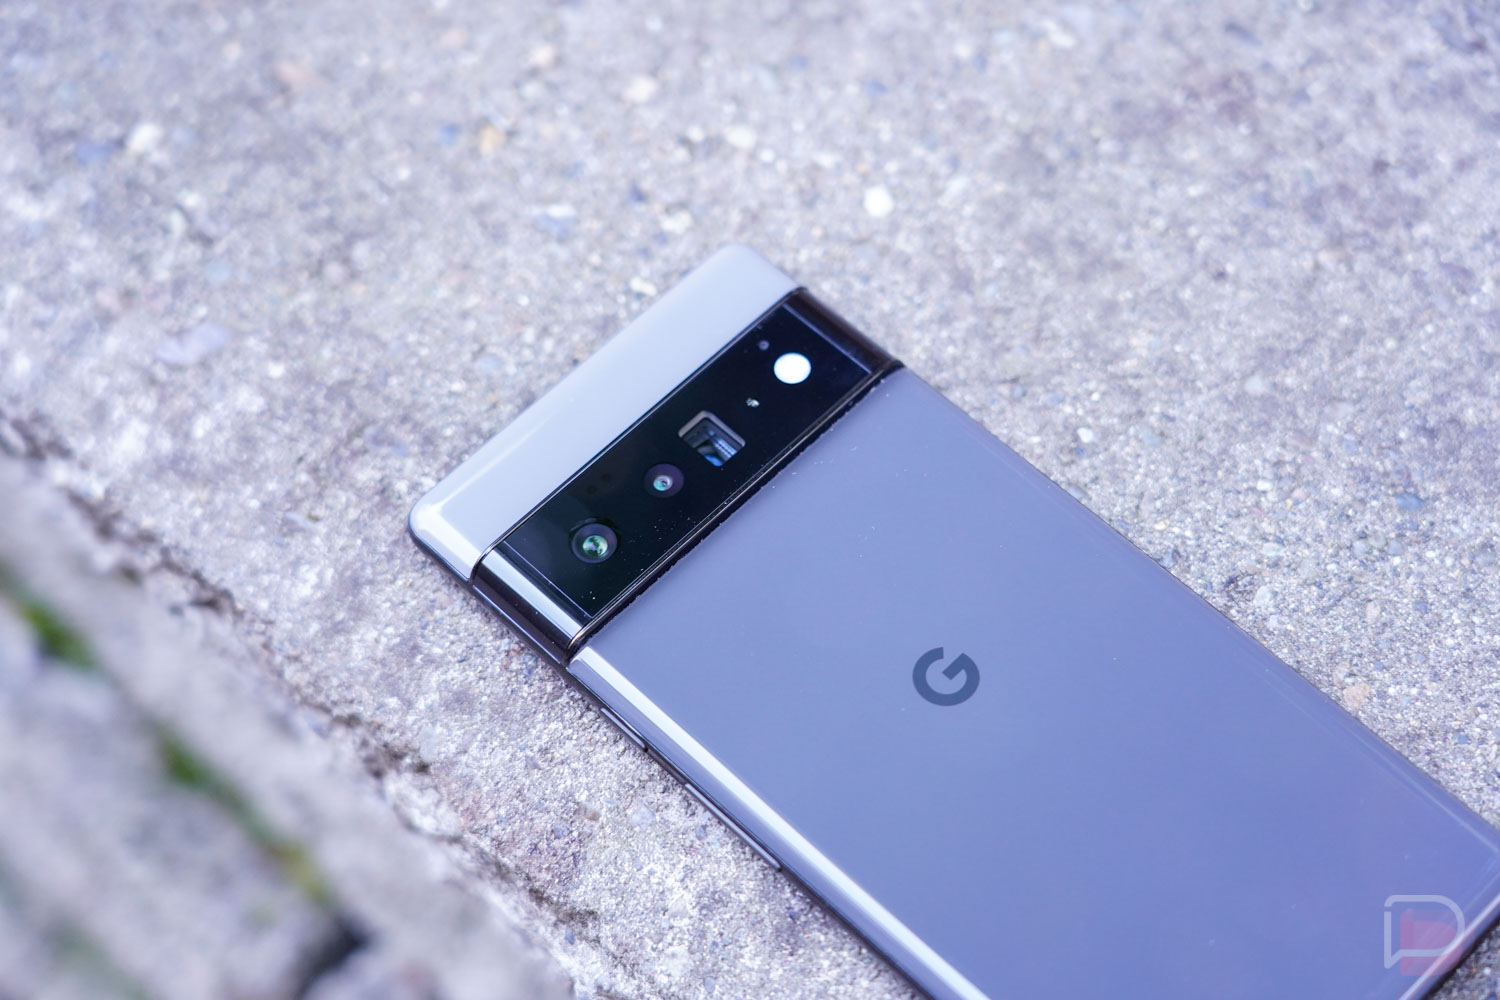 One year later, the Pixel 6 Pro is still Google's best smartphone